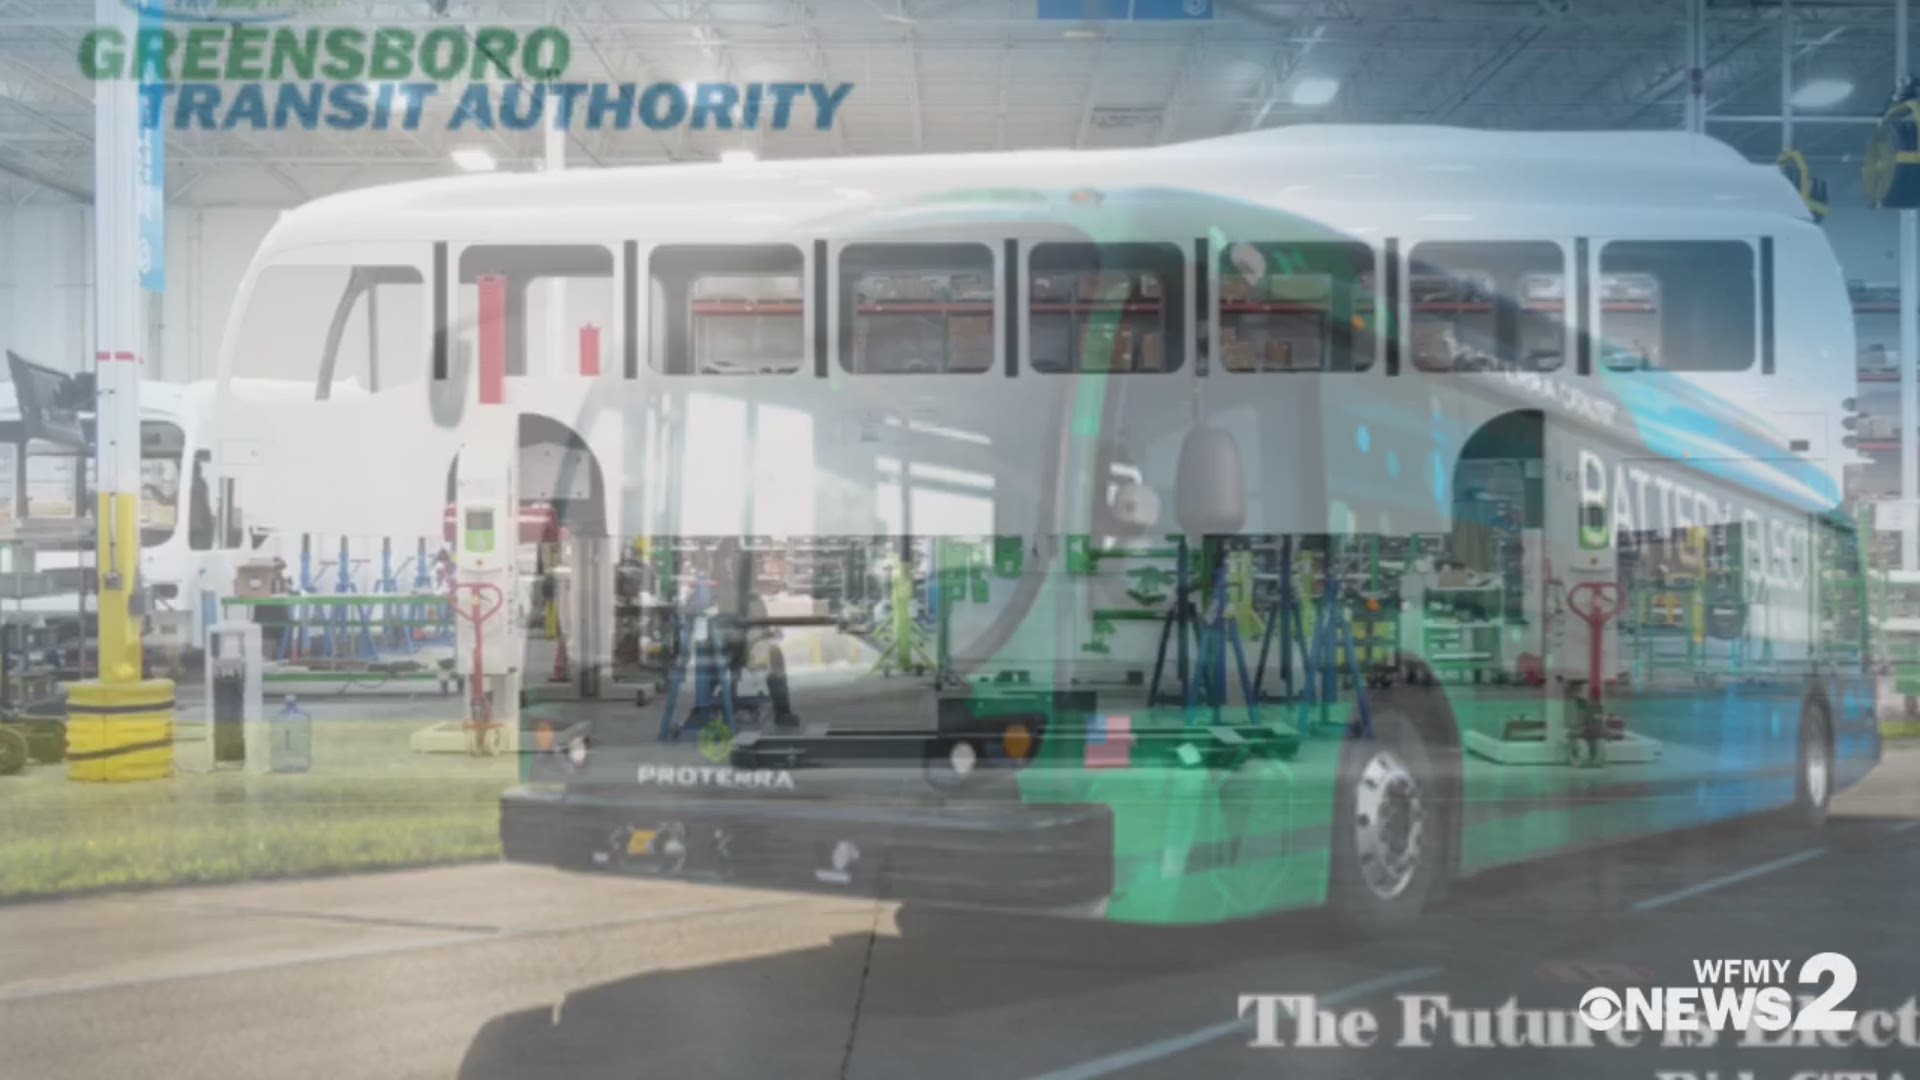 Greensboro Transit Authority has six new electric buses with more on the way. GTA is the first municipal transit system in North Carolina to deploy the emission-free buses into service.